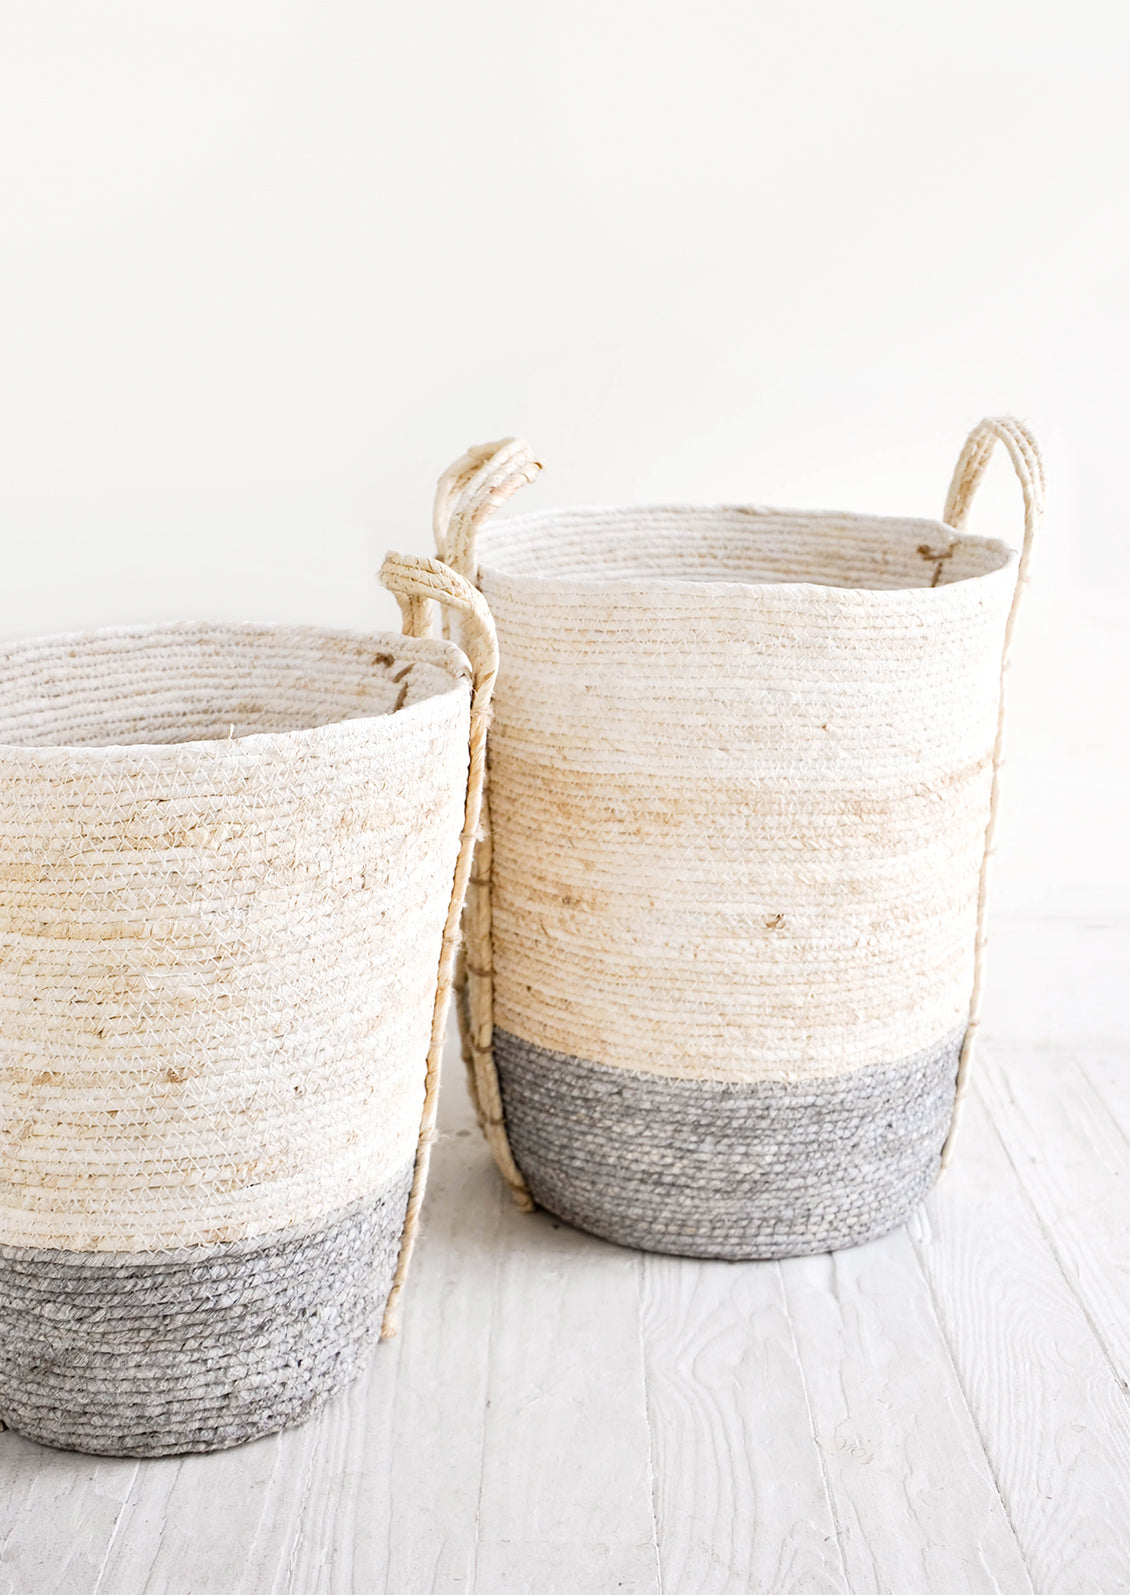 Tall, round storage baskets made from natural maize fiber, fiber handles attached at sides, band of contrasting grey color along bottom.